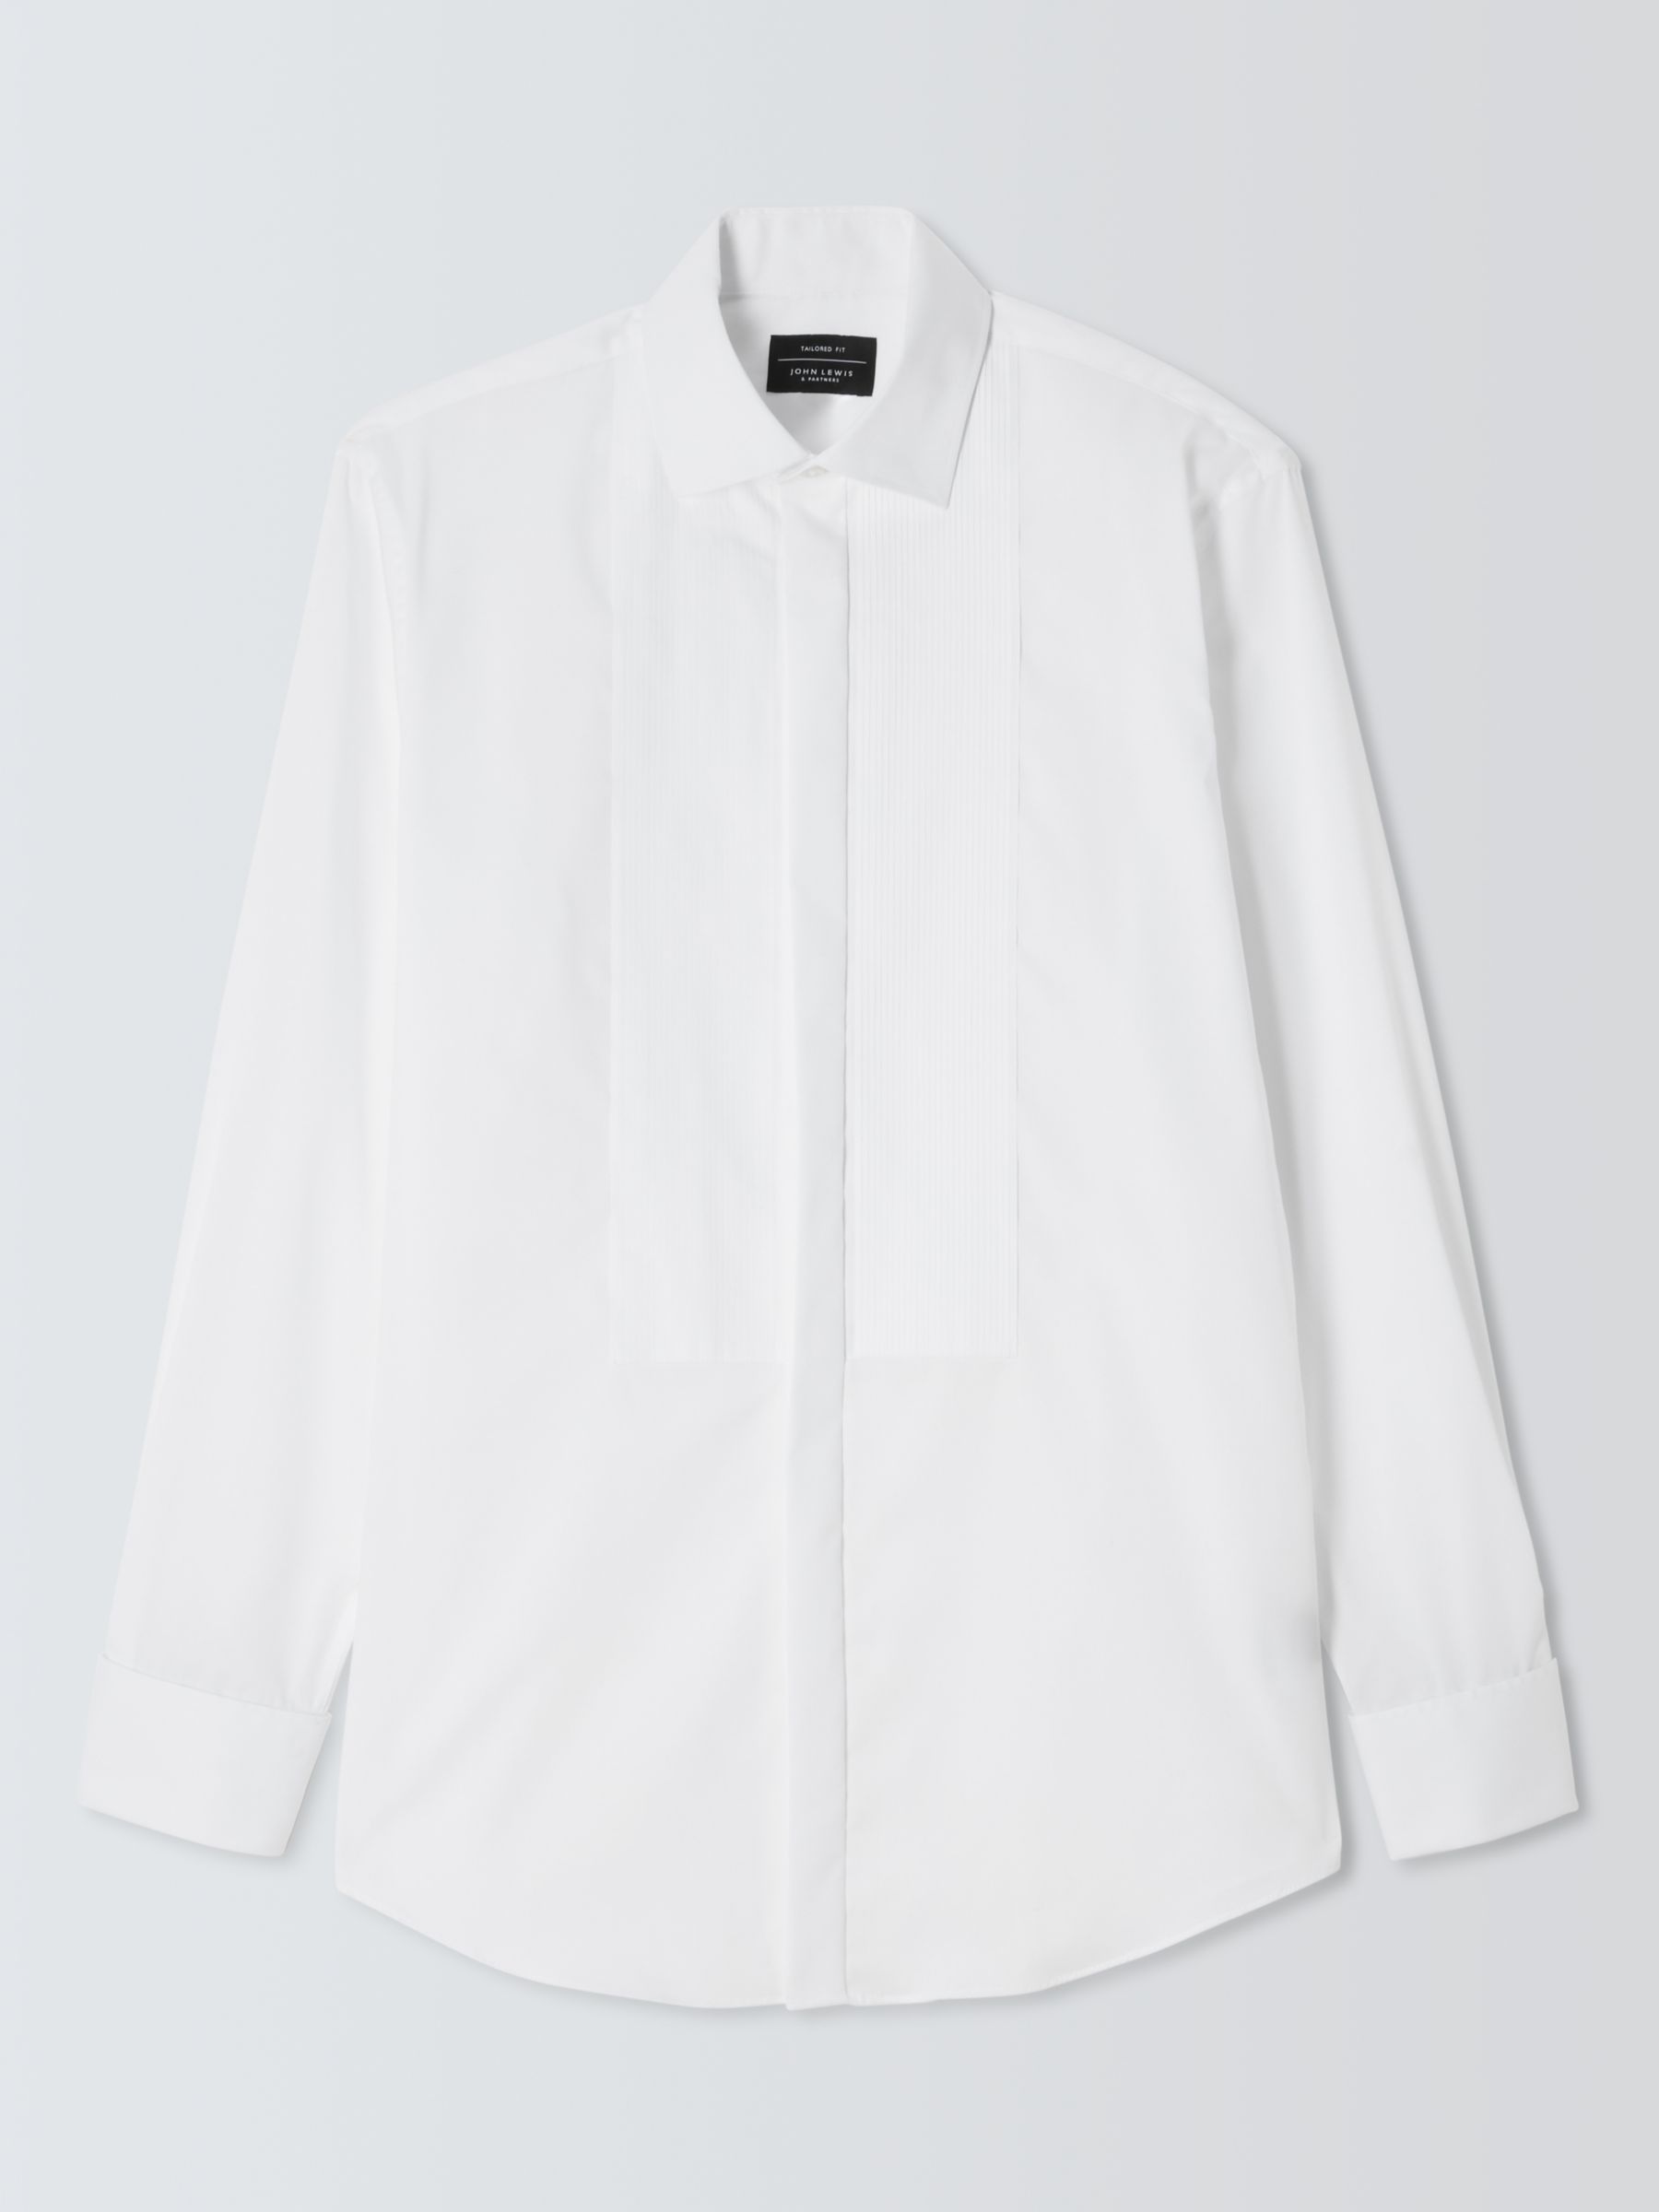 John Lewis Pleated Point Collar Tailored Fit Dress Shirt, White, 15R